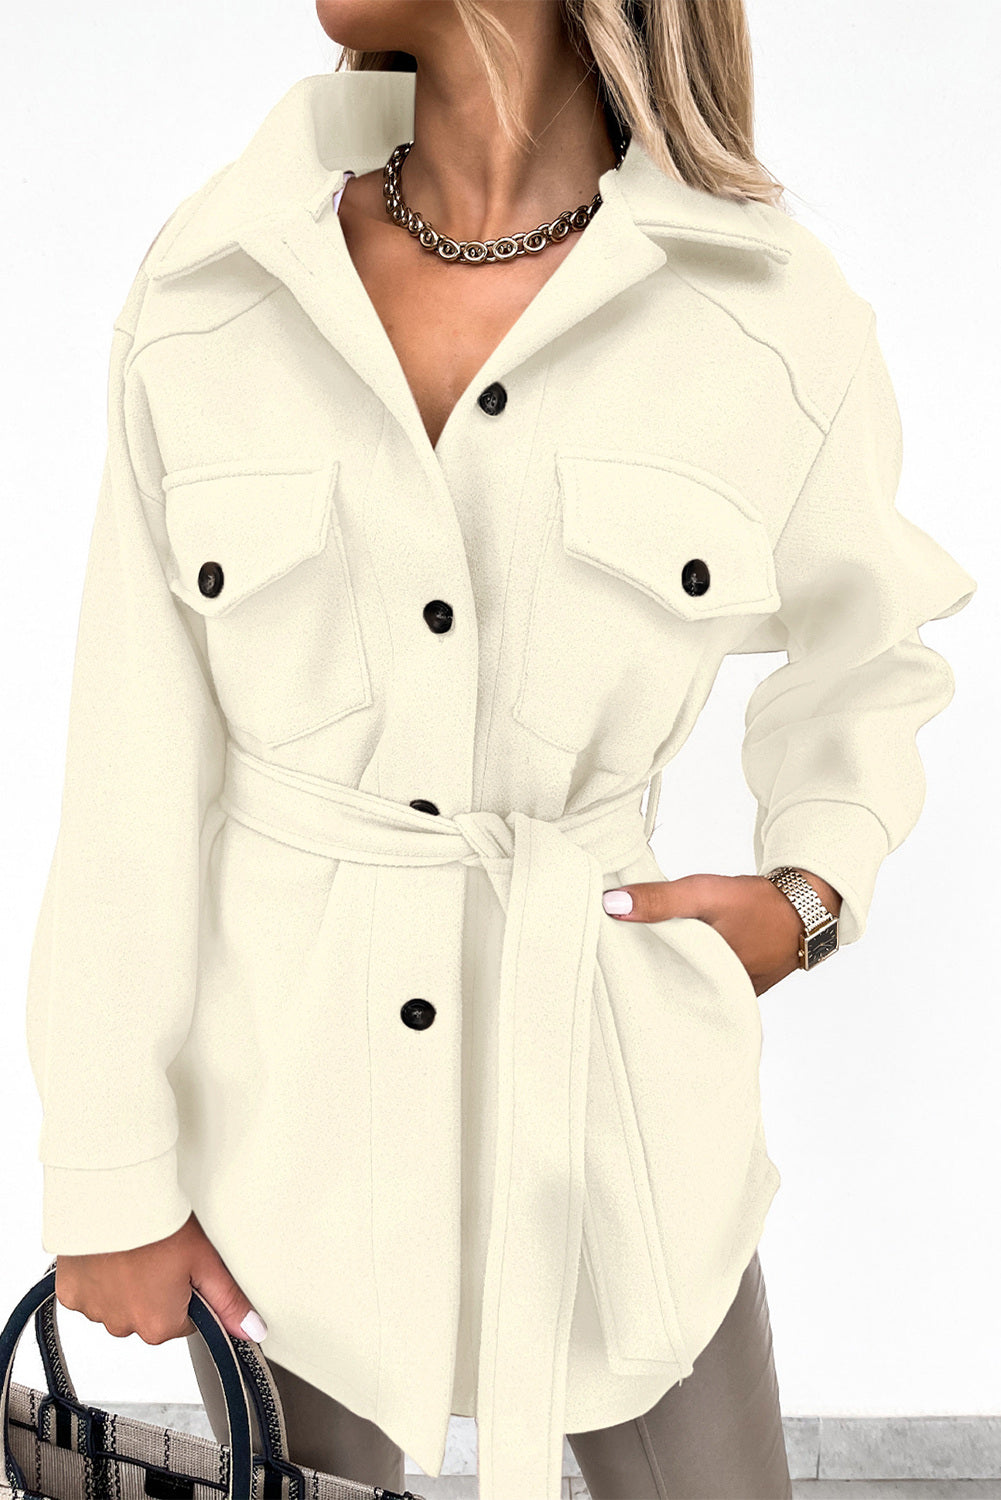 White Women's Lapel Button Down Coat Winter Belted Coat with Pockets LC8511359-1